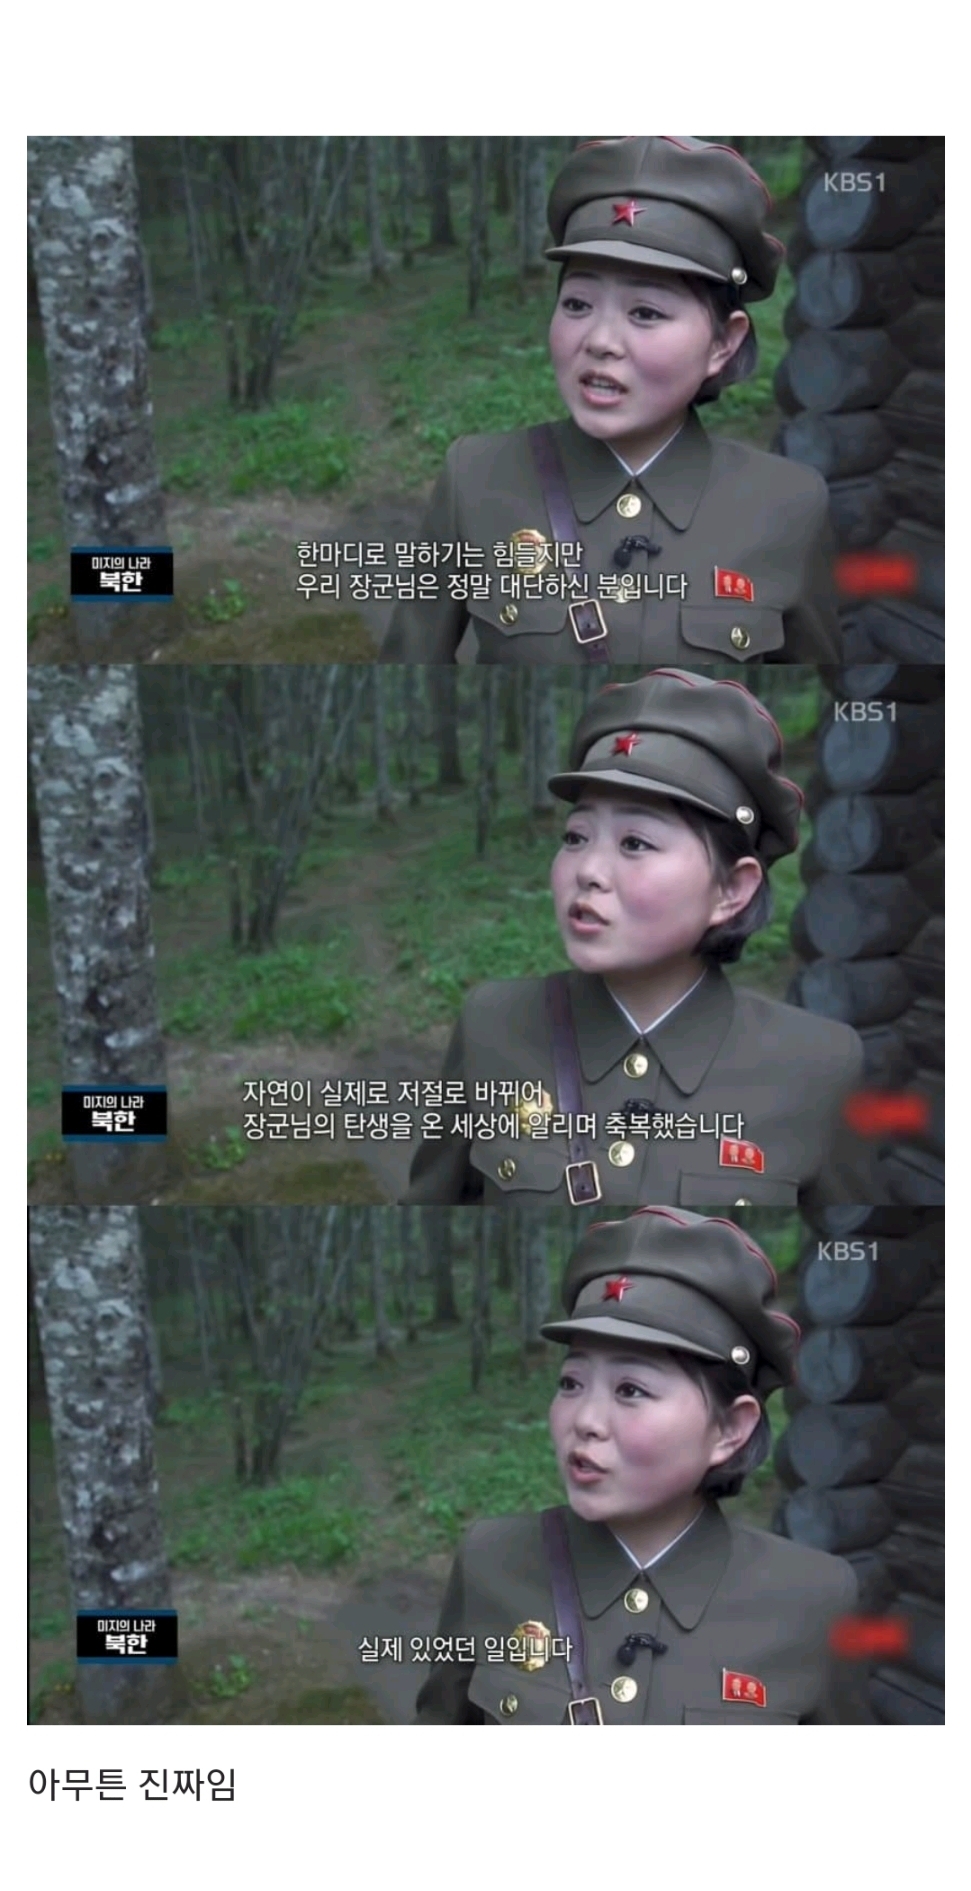 An American reporter's tour of North Korea.